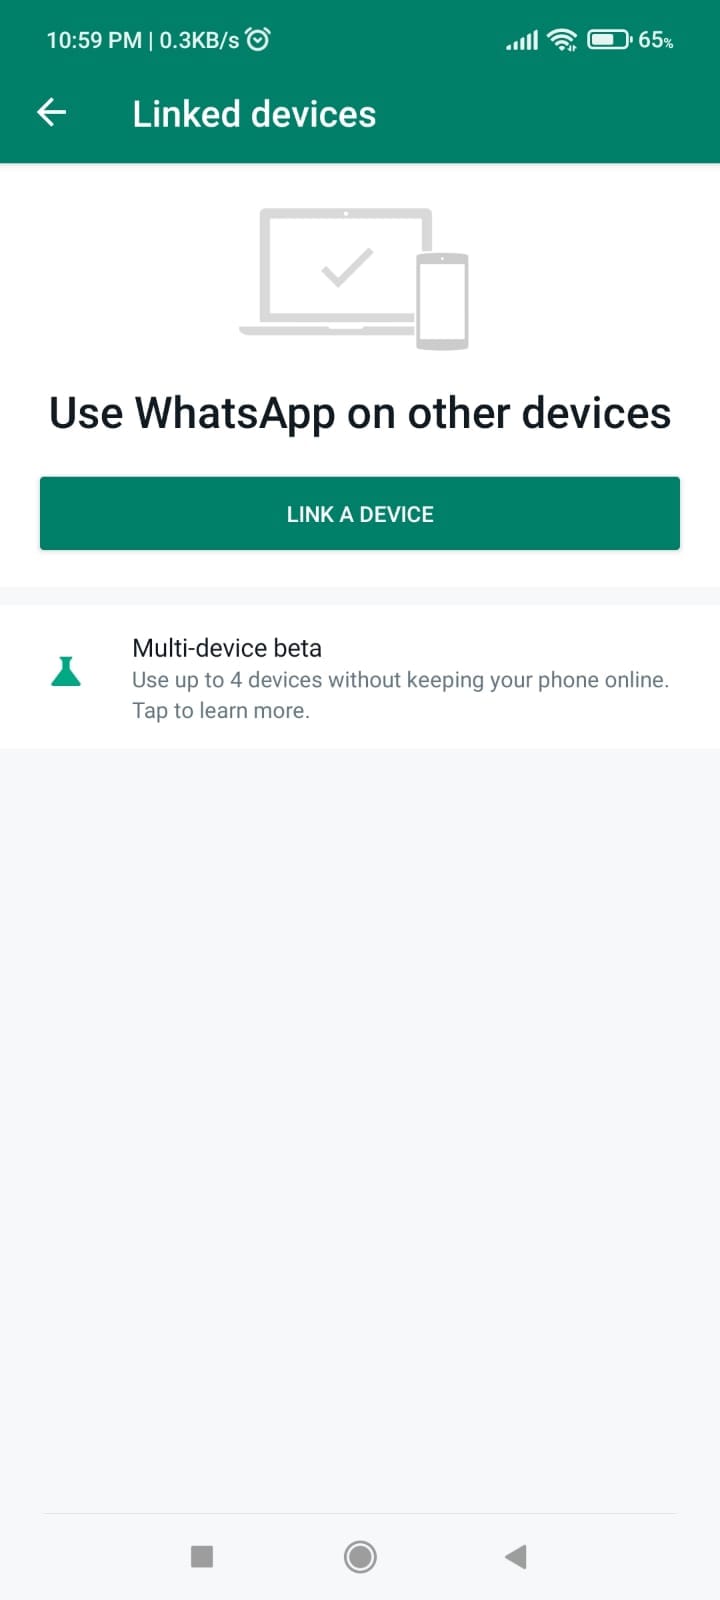 how to link your whatsapp without keeping your smartphone, how to link your whatsapp to desktop without keeping smartphone online, how to join whatsapp beta program, link your whatsapp withot keeping it online, how to link your whatsapp to desktop